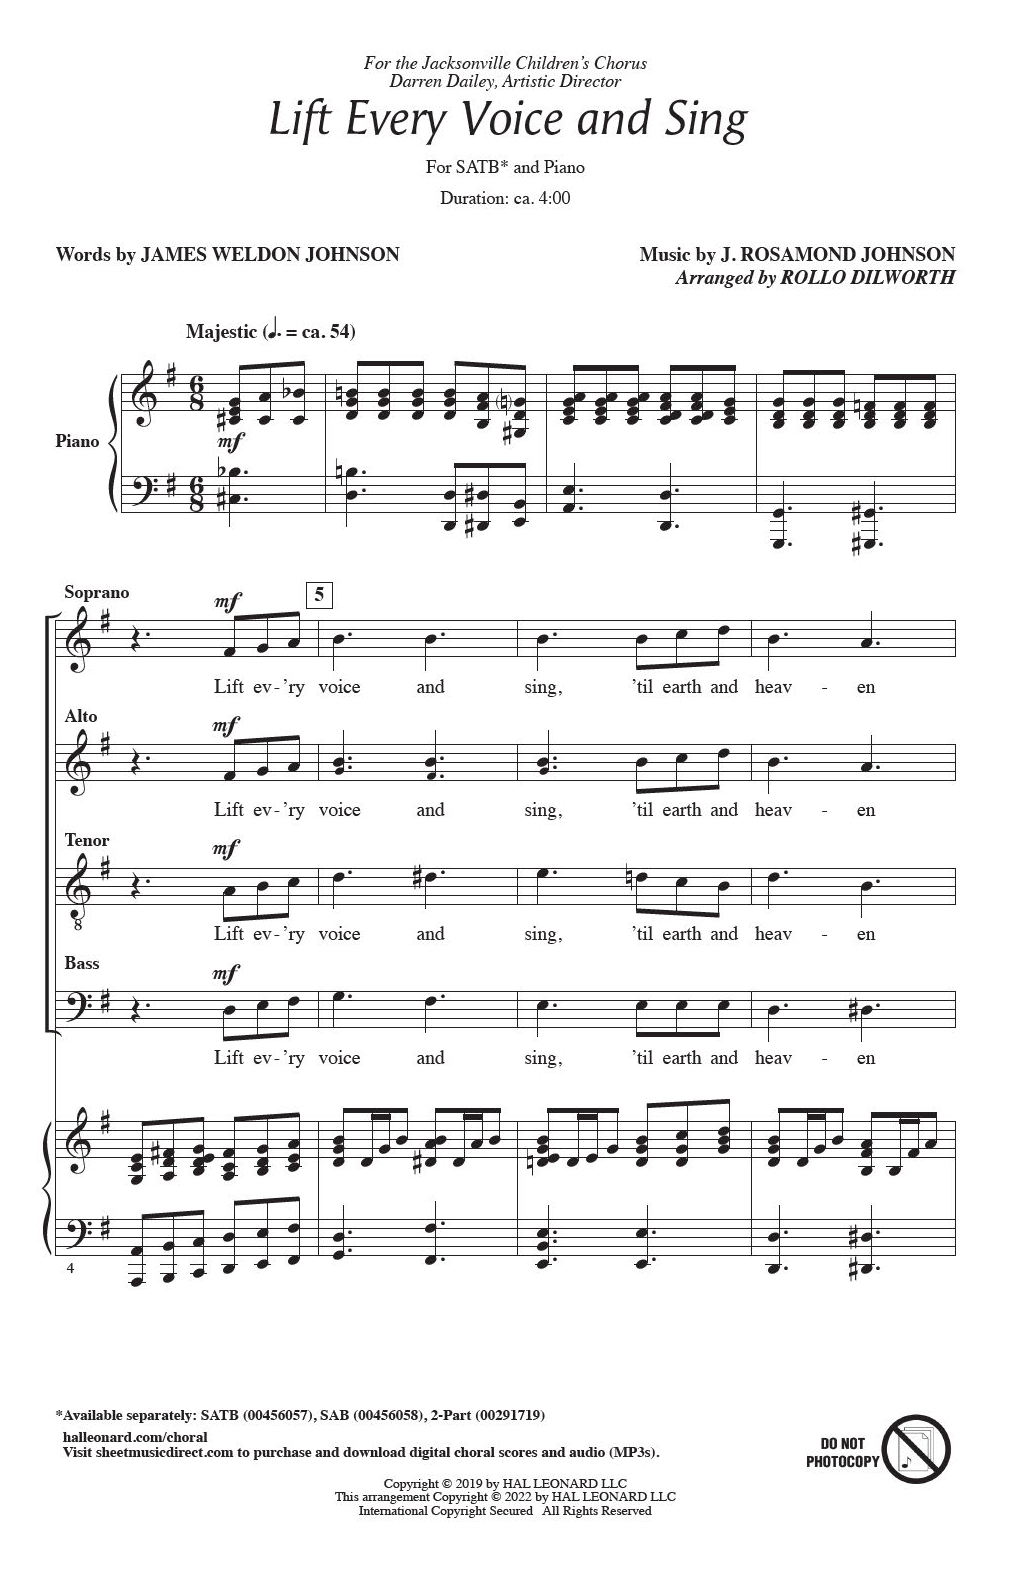 Download James Weldon Johnson and J. Rosamond Lift Every Voice And Sing (arr. Rollo D Sheet Music